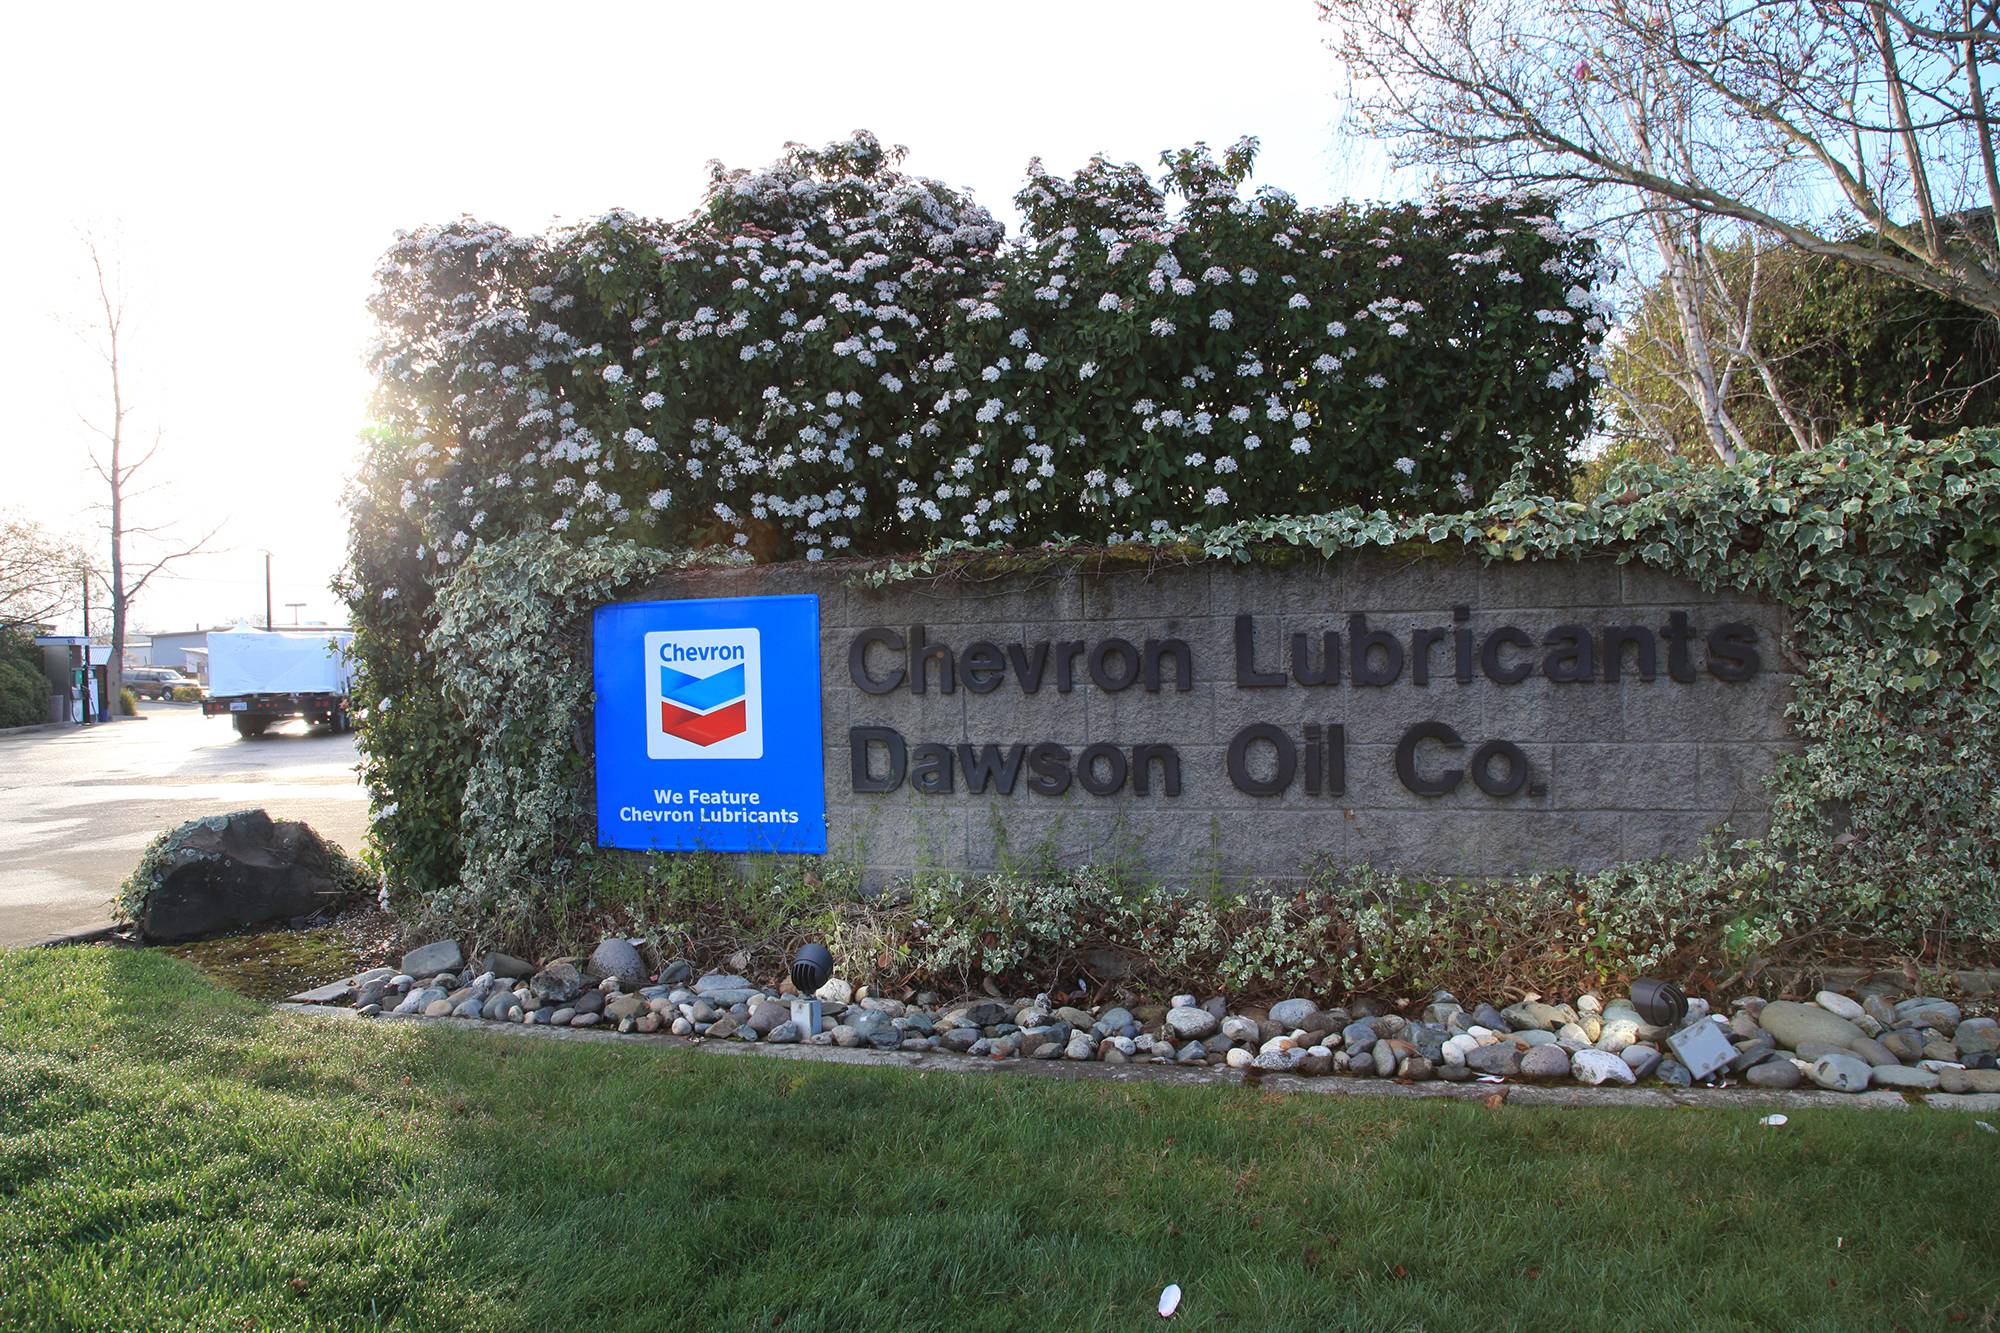 Since 1971, we've served Northern California's fuel and lubricant needs. Find out how Mel Dawson established an enduring family business through hard work.